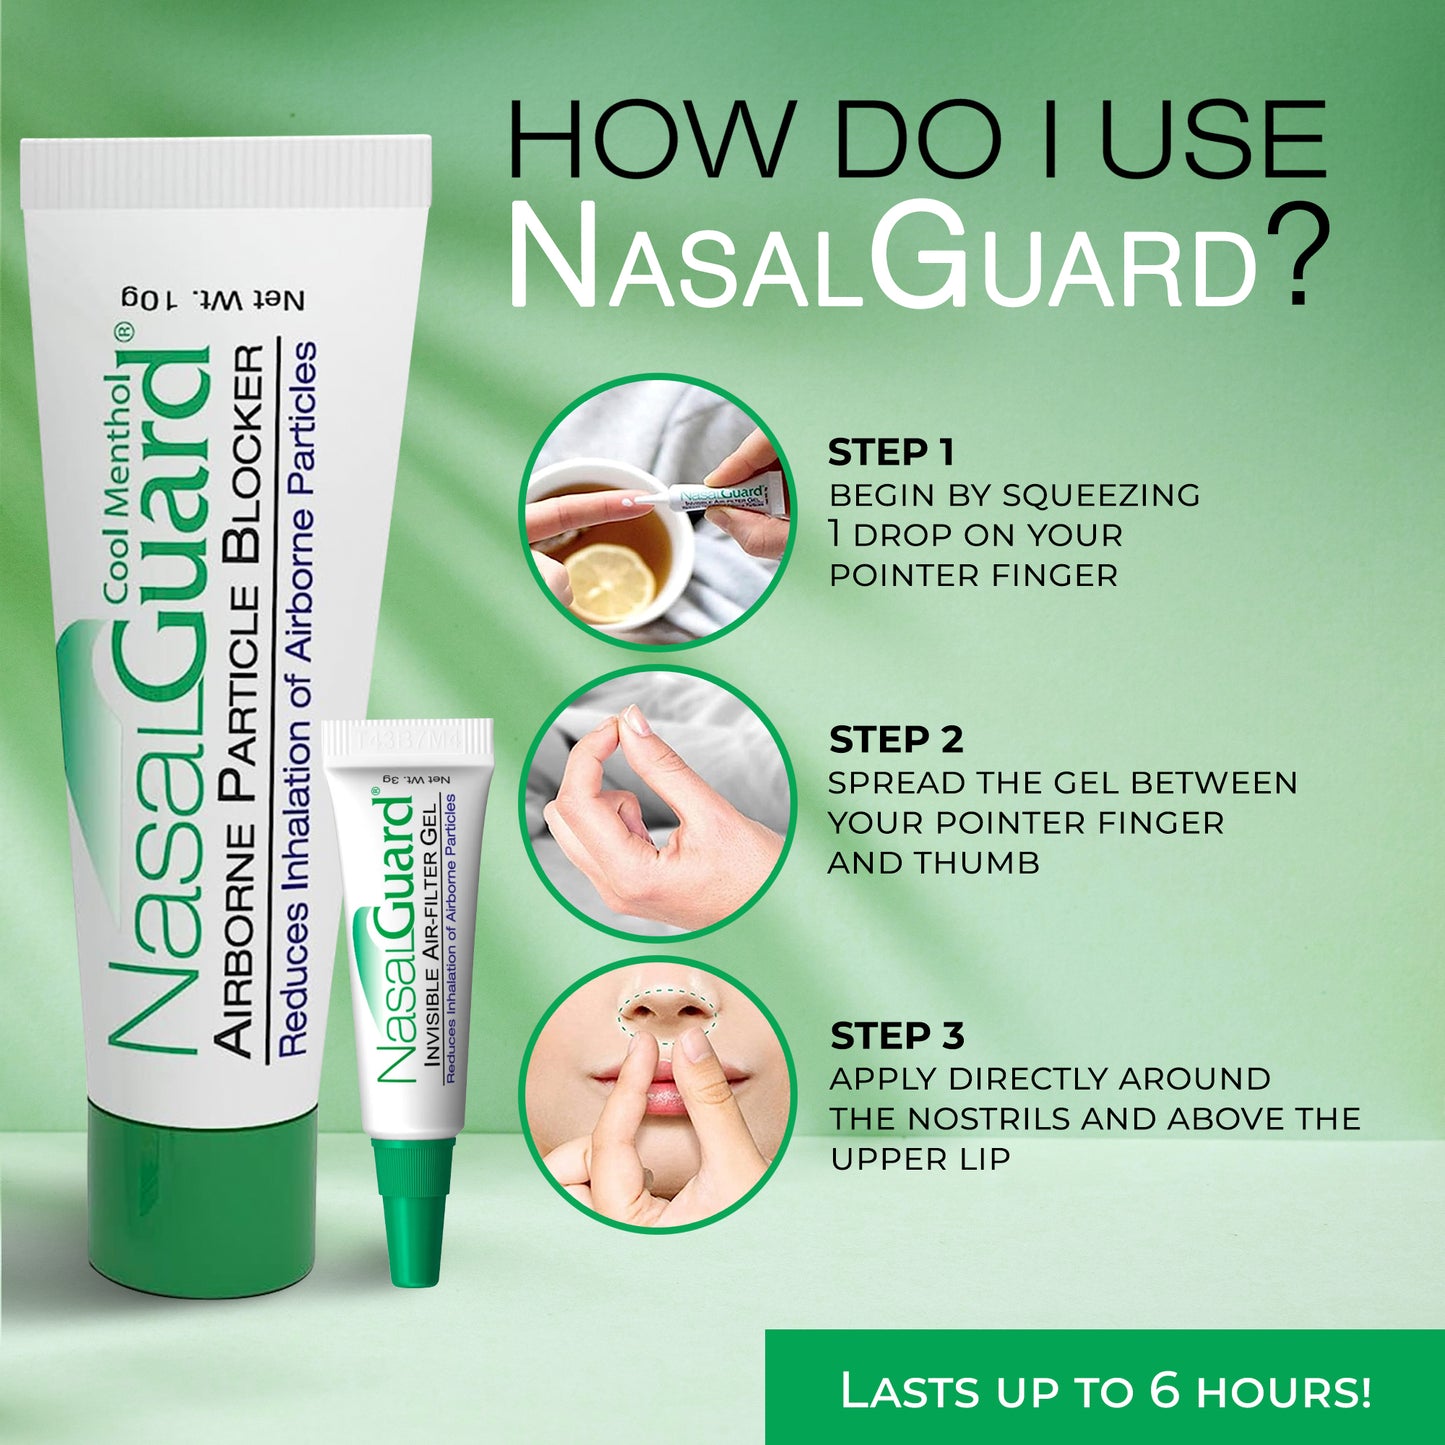 NasalGuard For Air Travelers, Airborne Particle Blocker | 3g Tube | (Pack of 6)